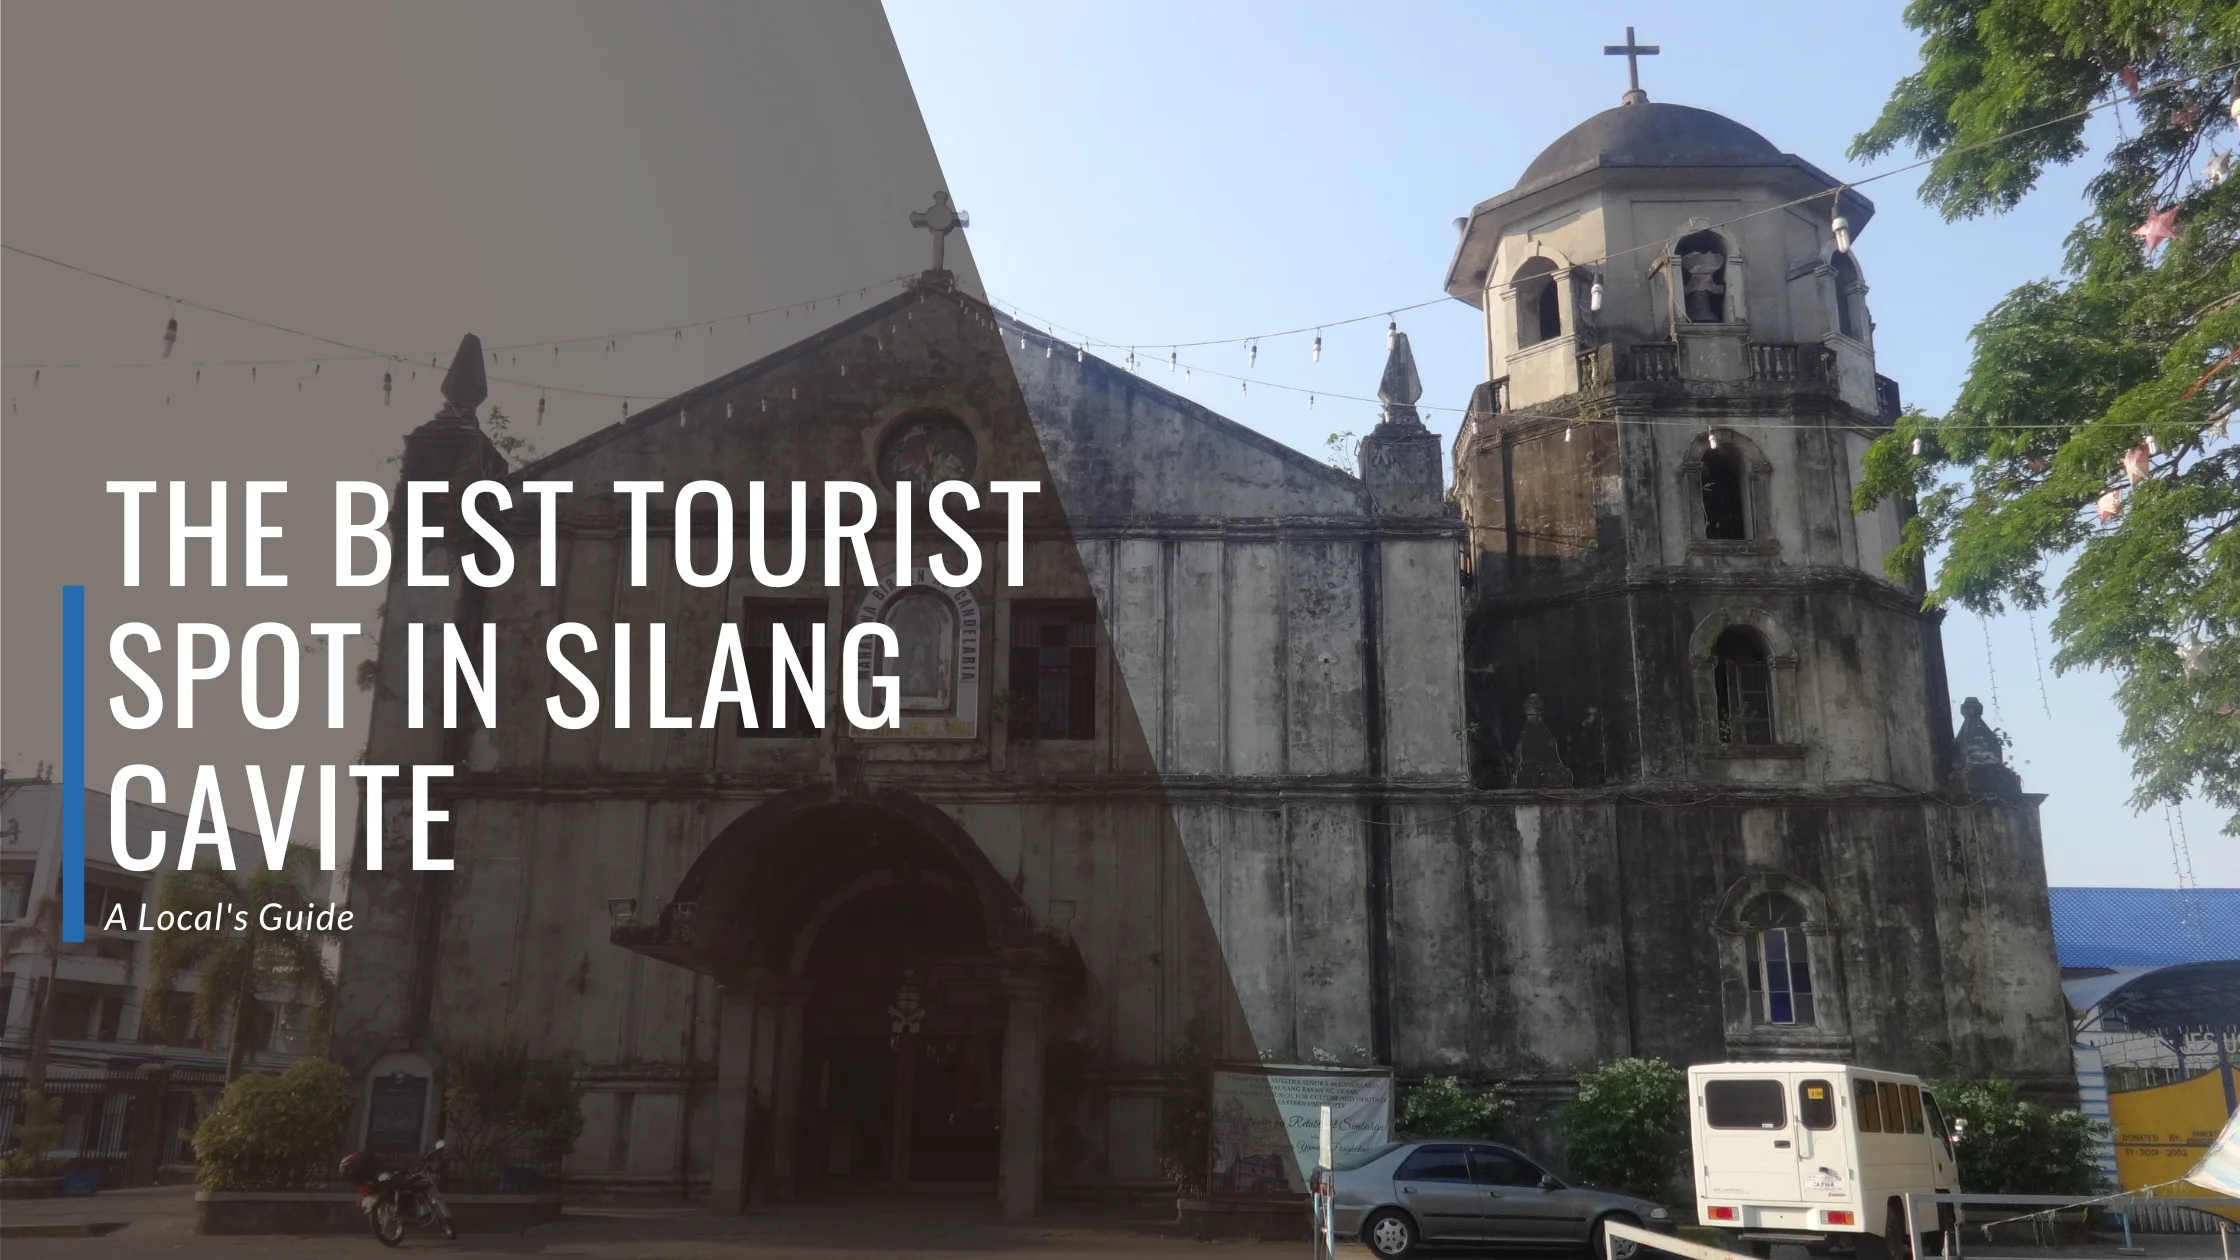 The Best Tourist Spot in SIlang Cavite - A Local's Guide